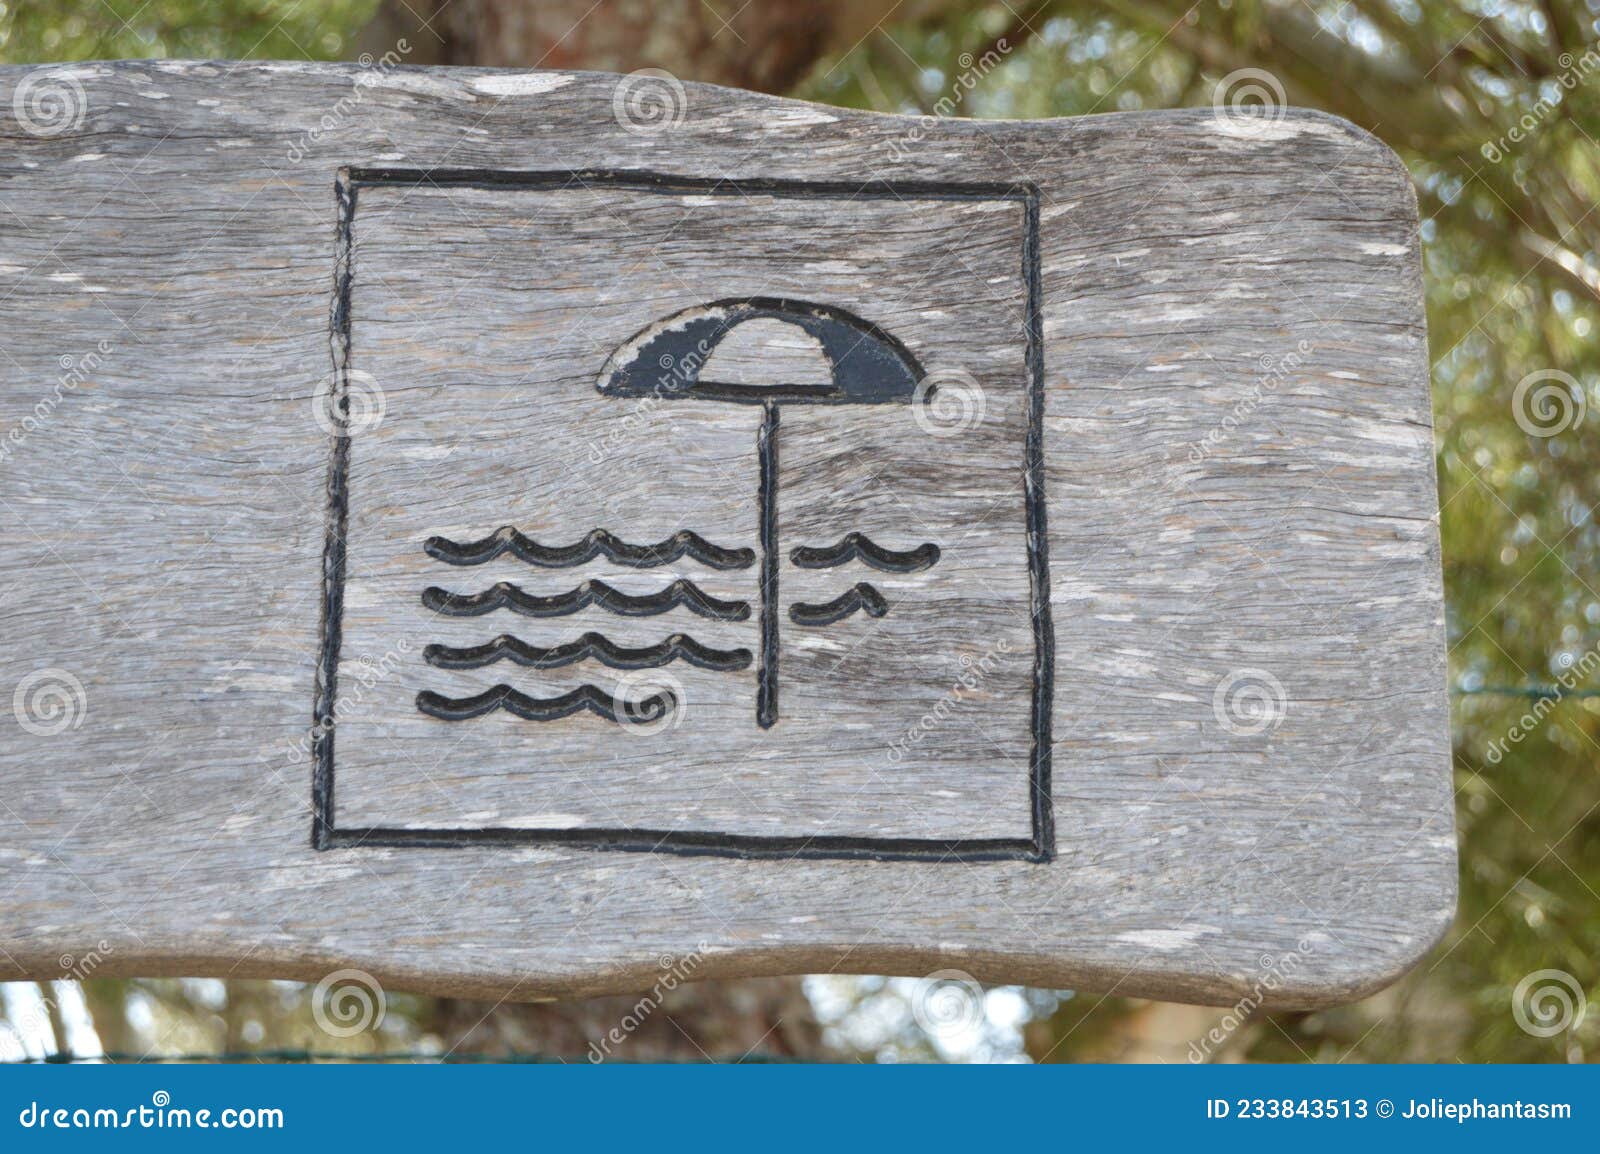 beach sign on wood. parasol and waves drawn on wood.